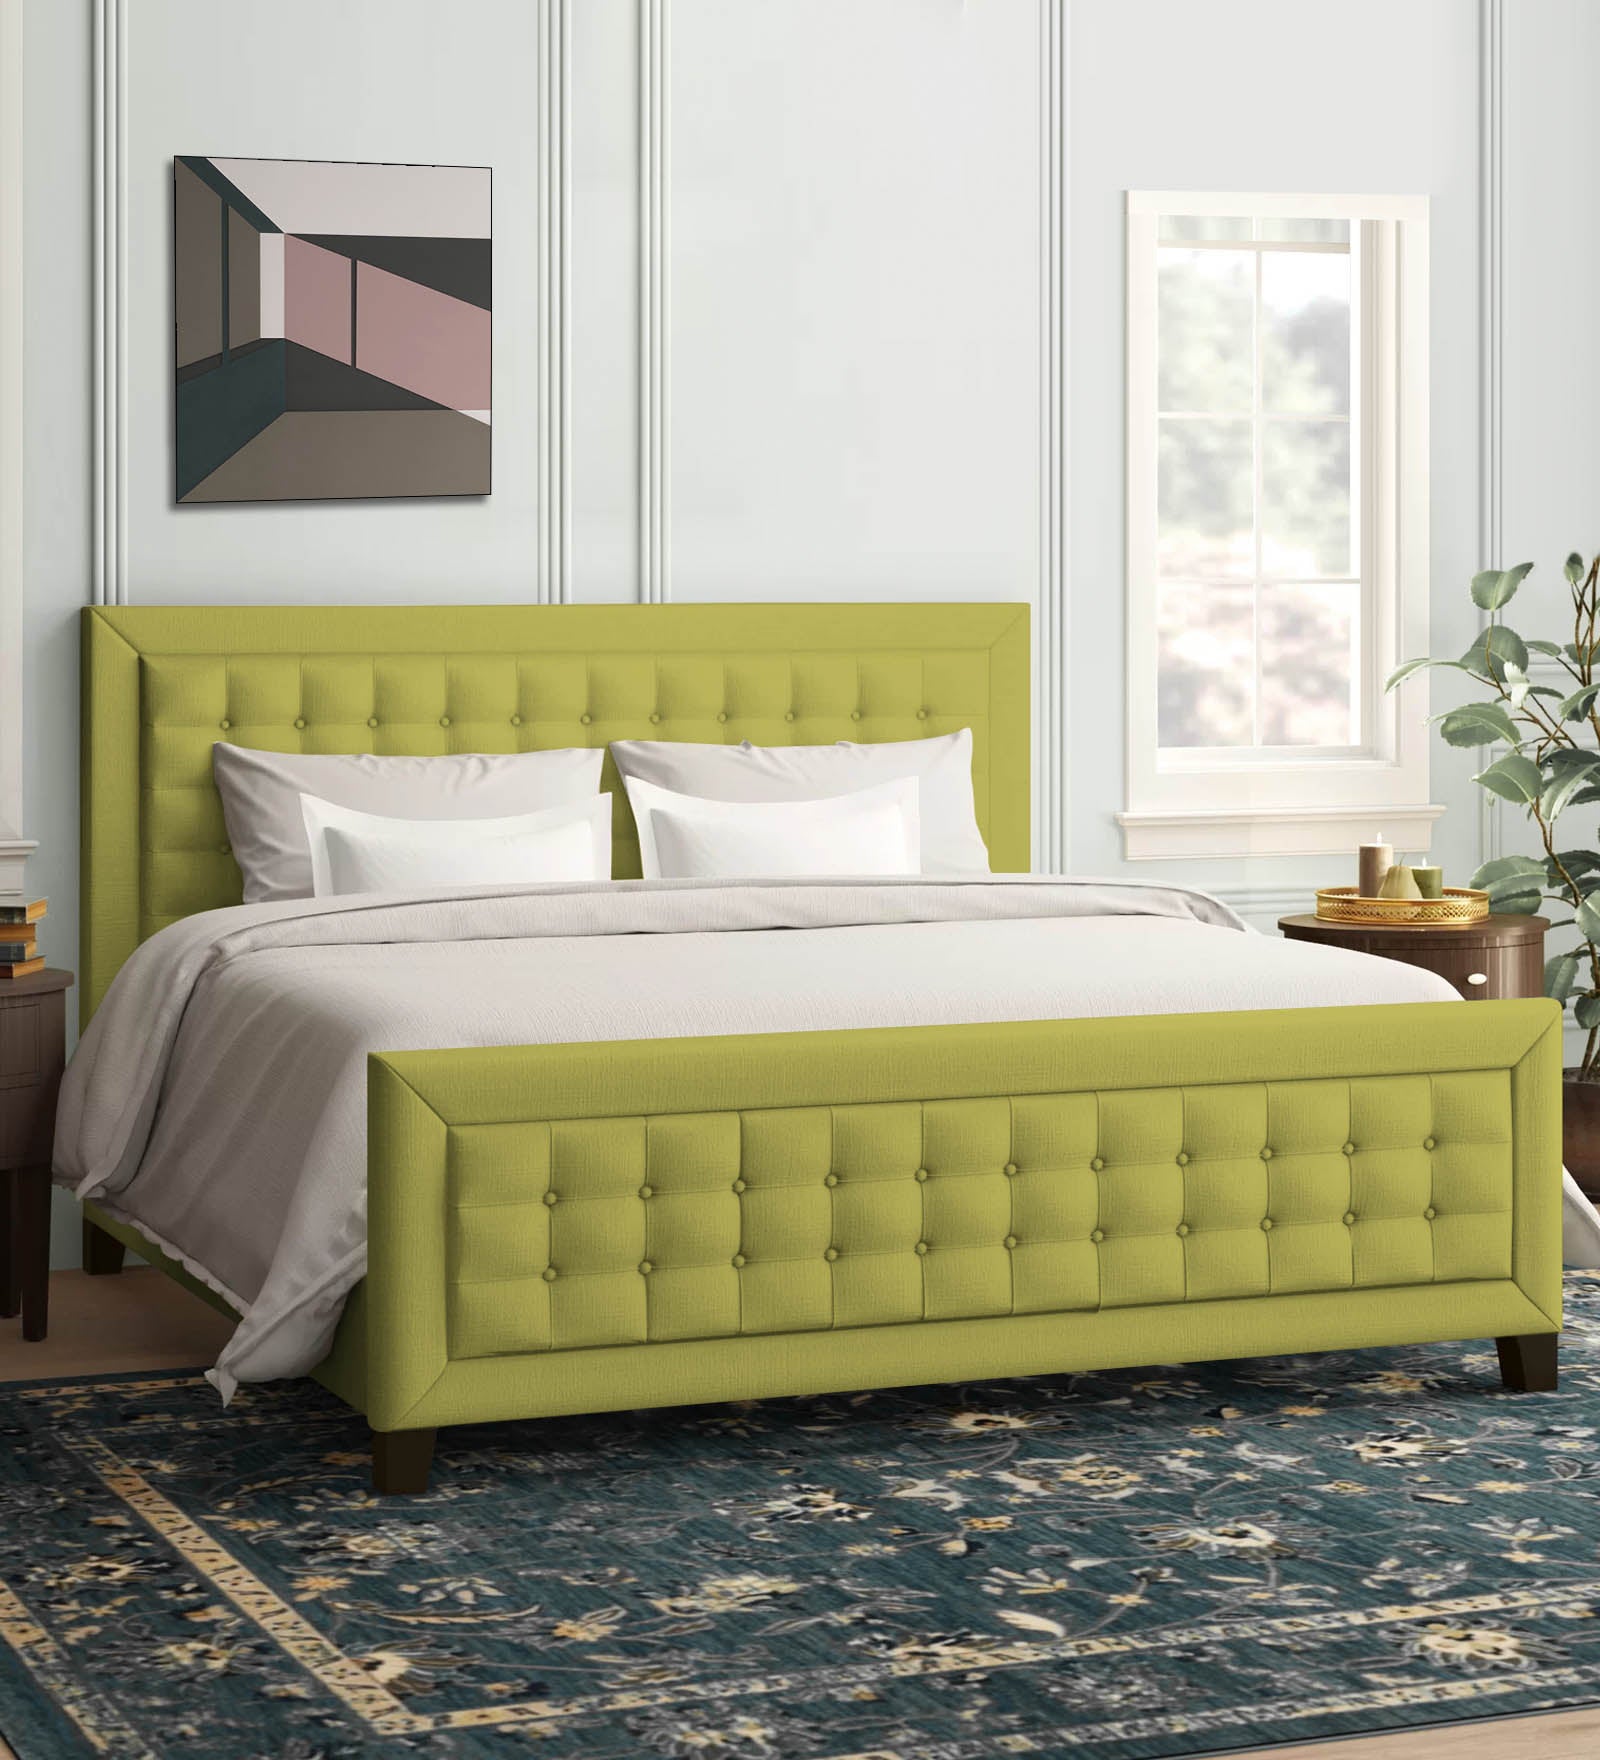 Kaster Fabric King Size Bed In Parrot Green Colour